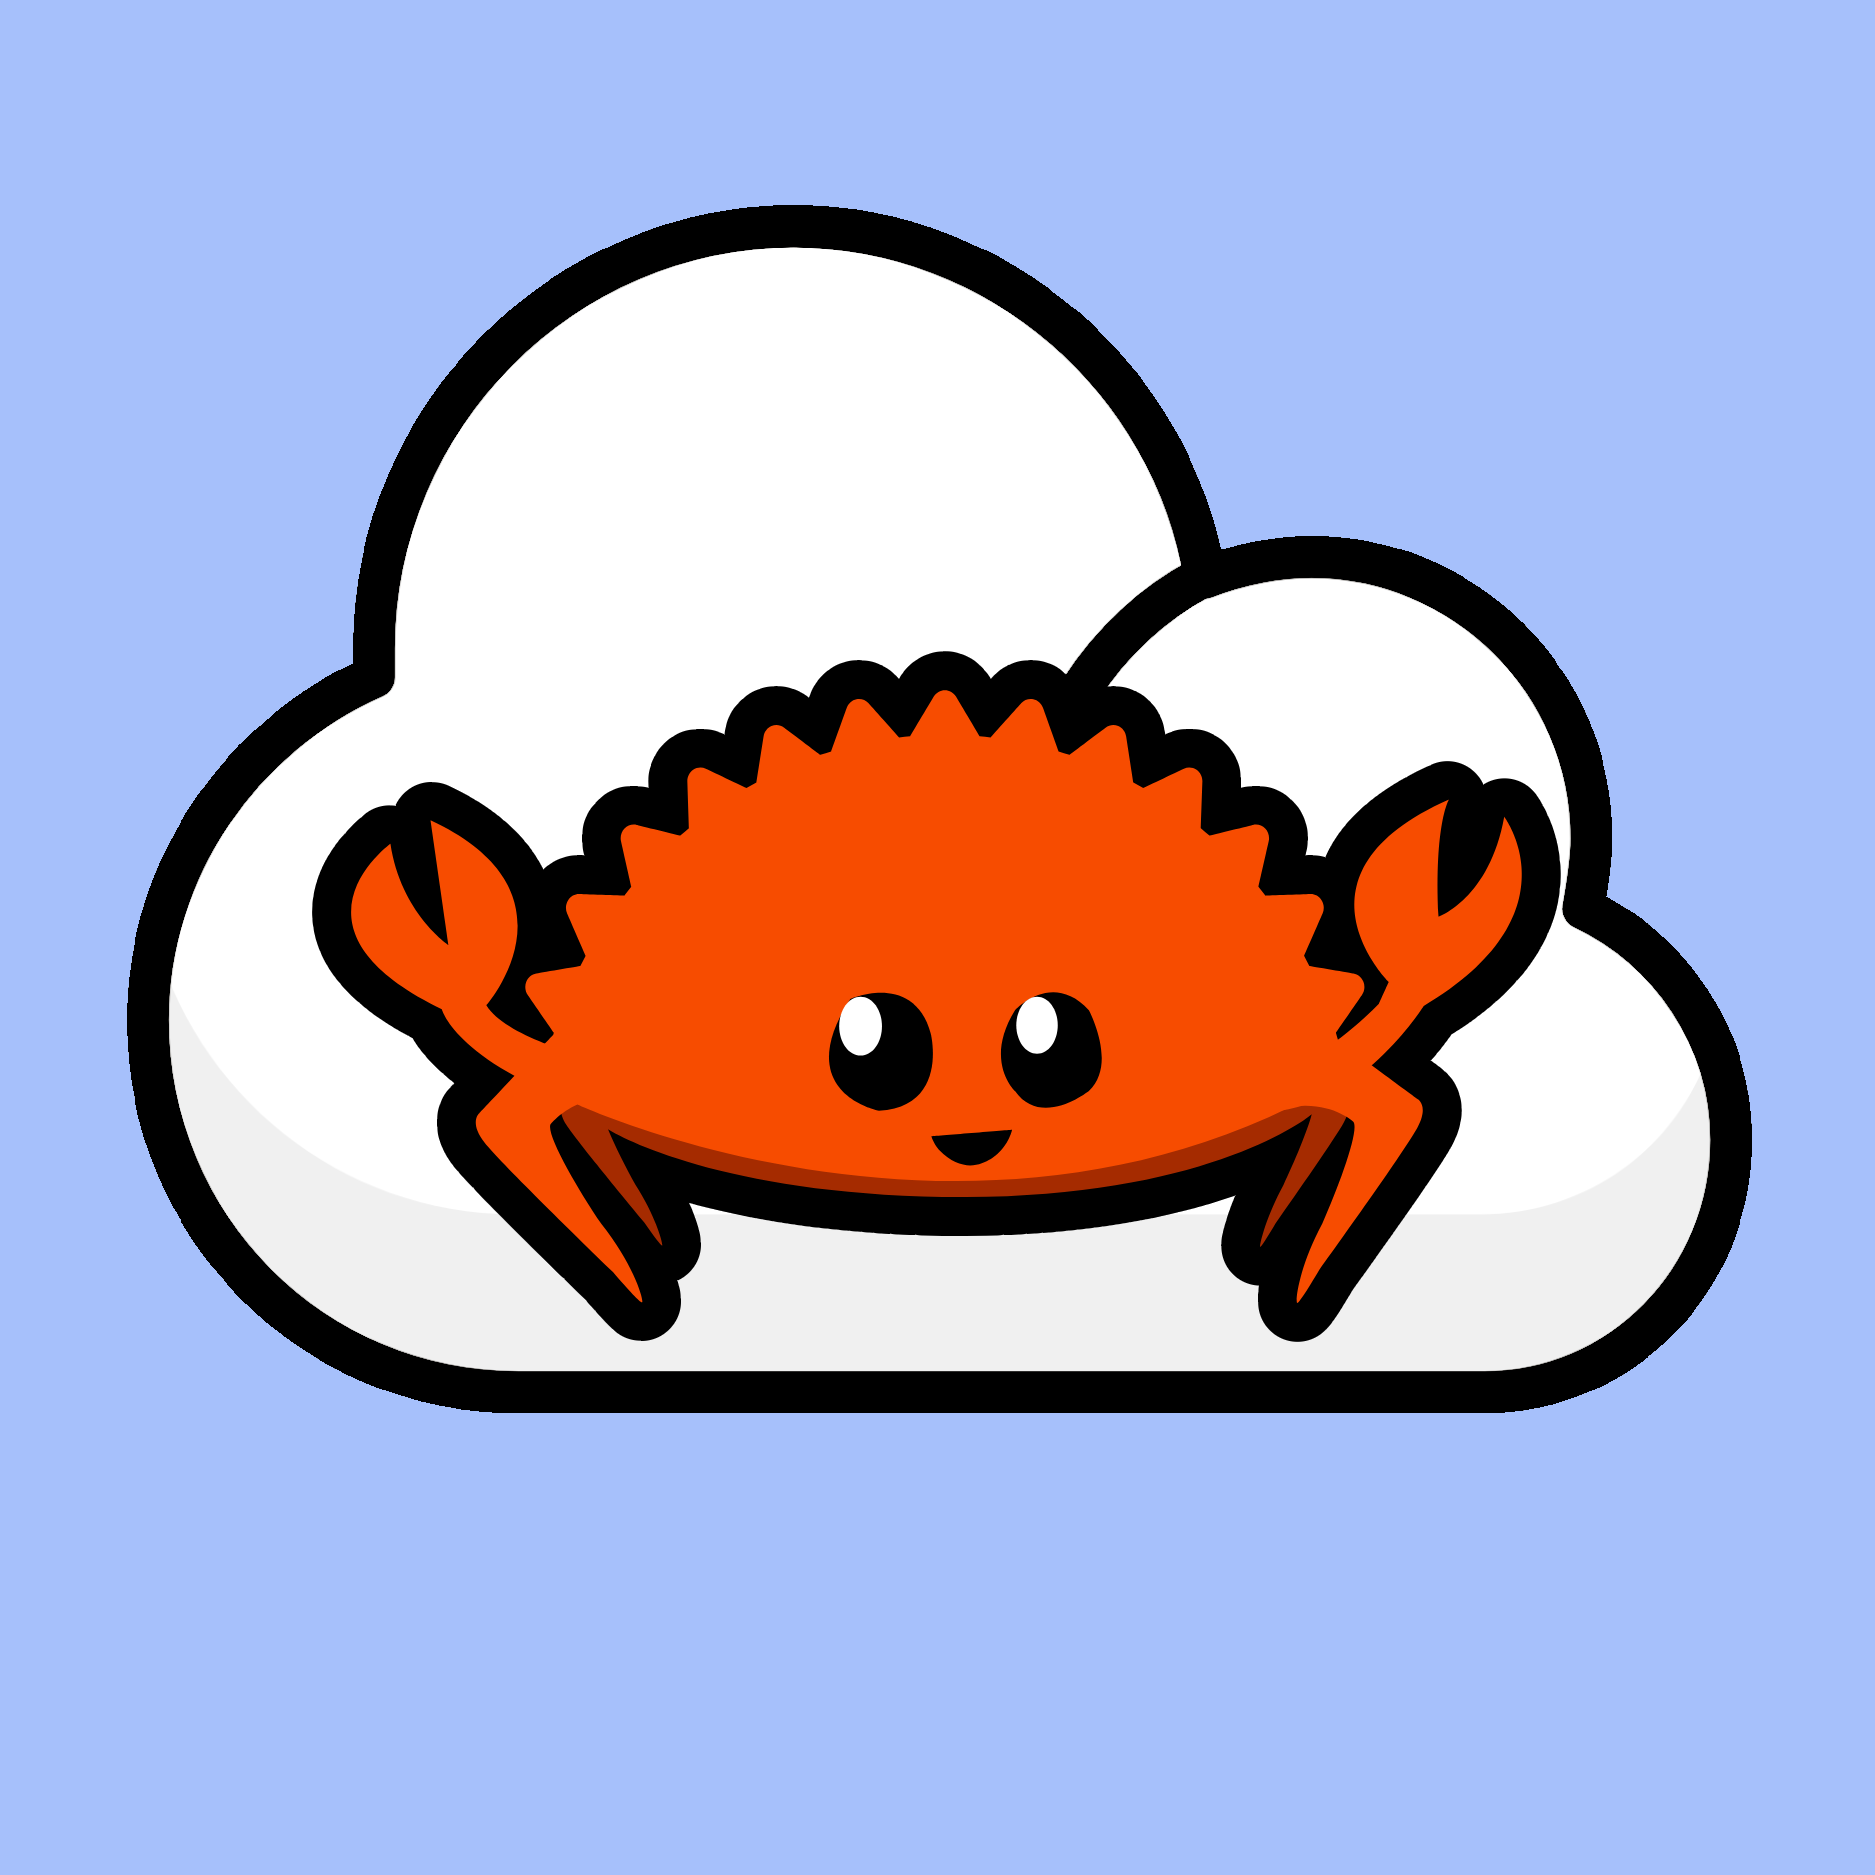 Rust Cloud Native logo, which features the Ferris crab mascot on a white cloud with a light blue background.